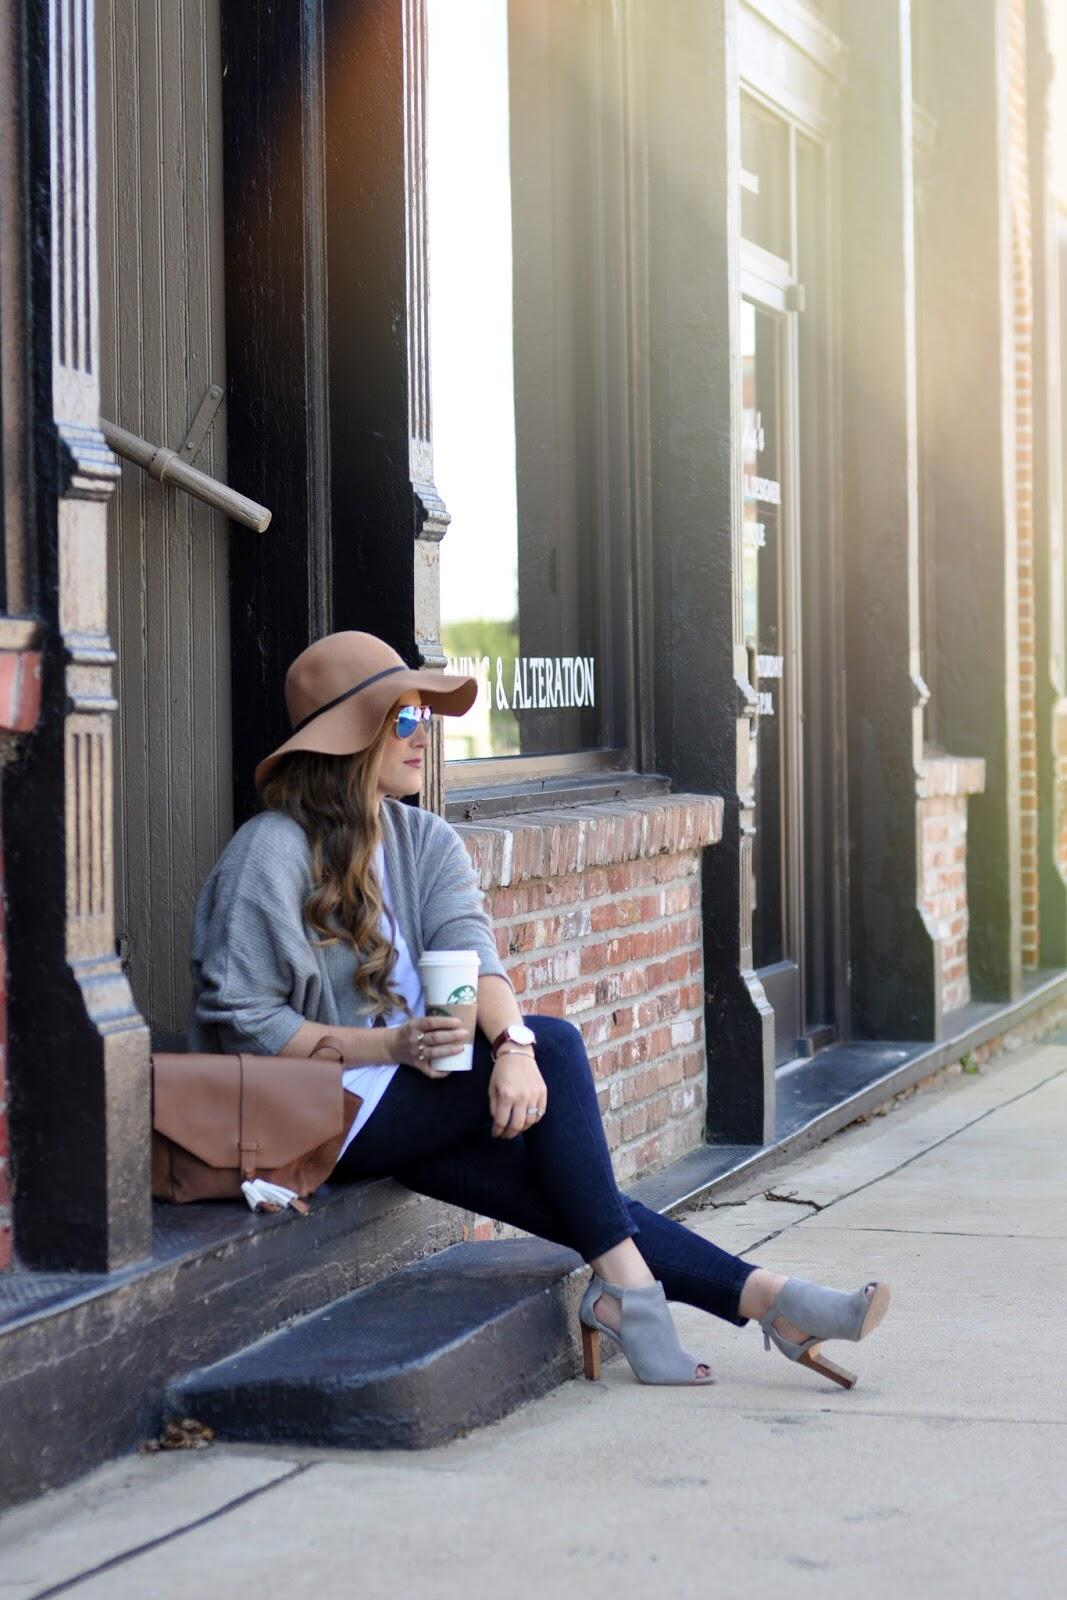 Summer accessories featured by popular fashion blogger, Walking in Memphis in High Heels